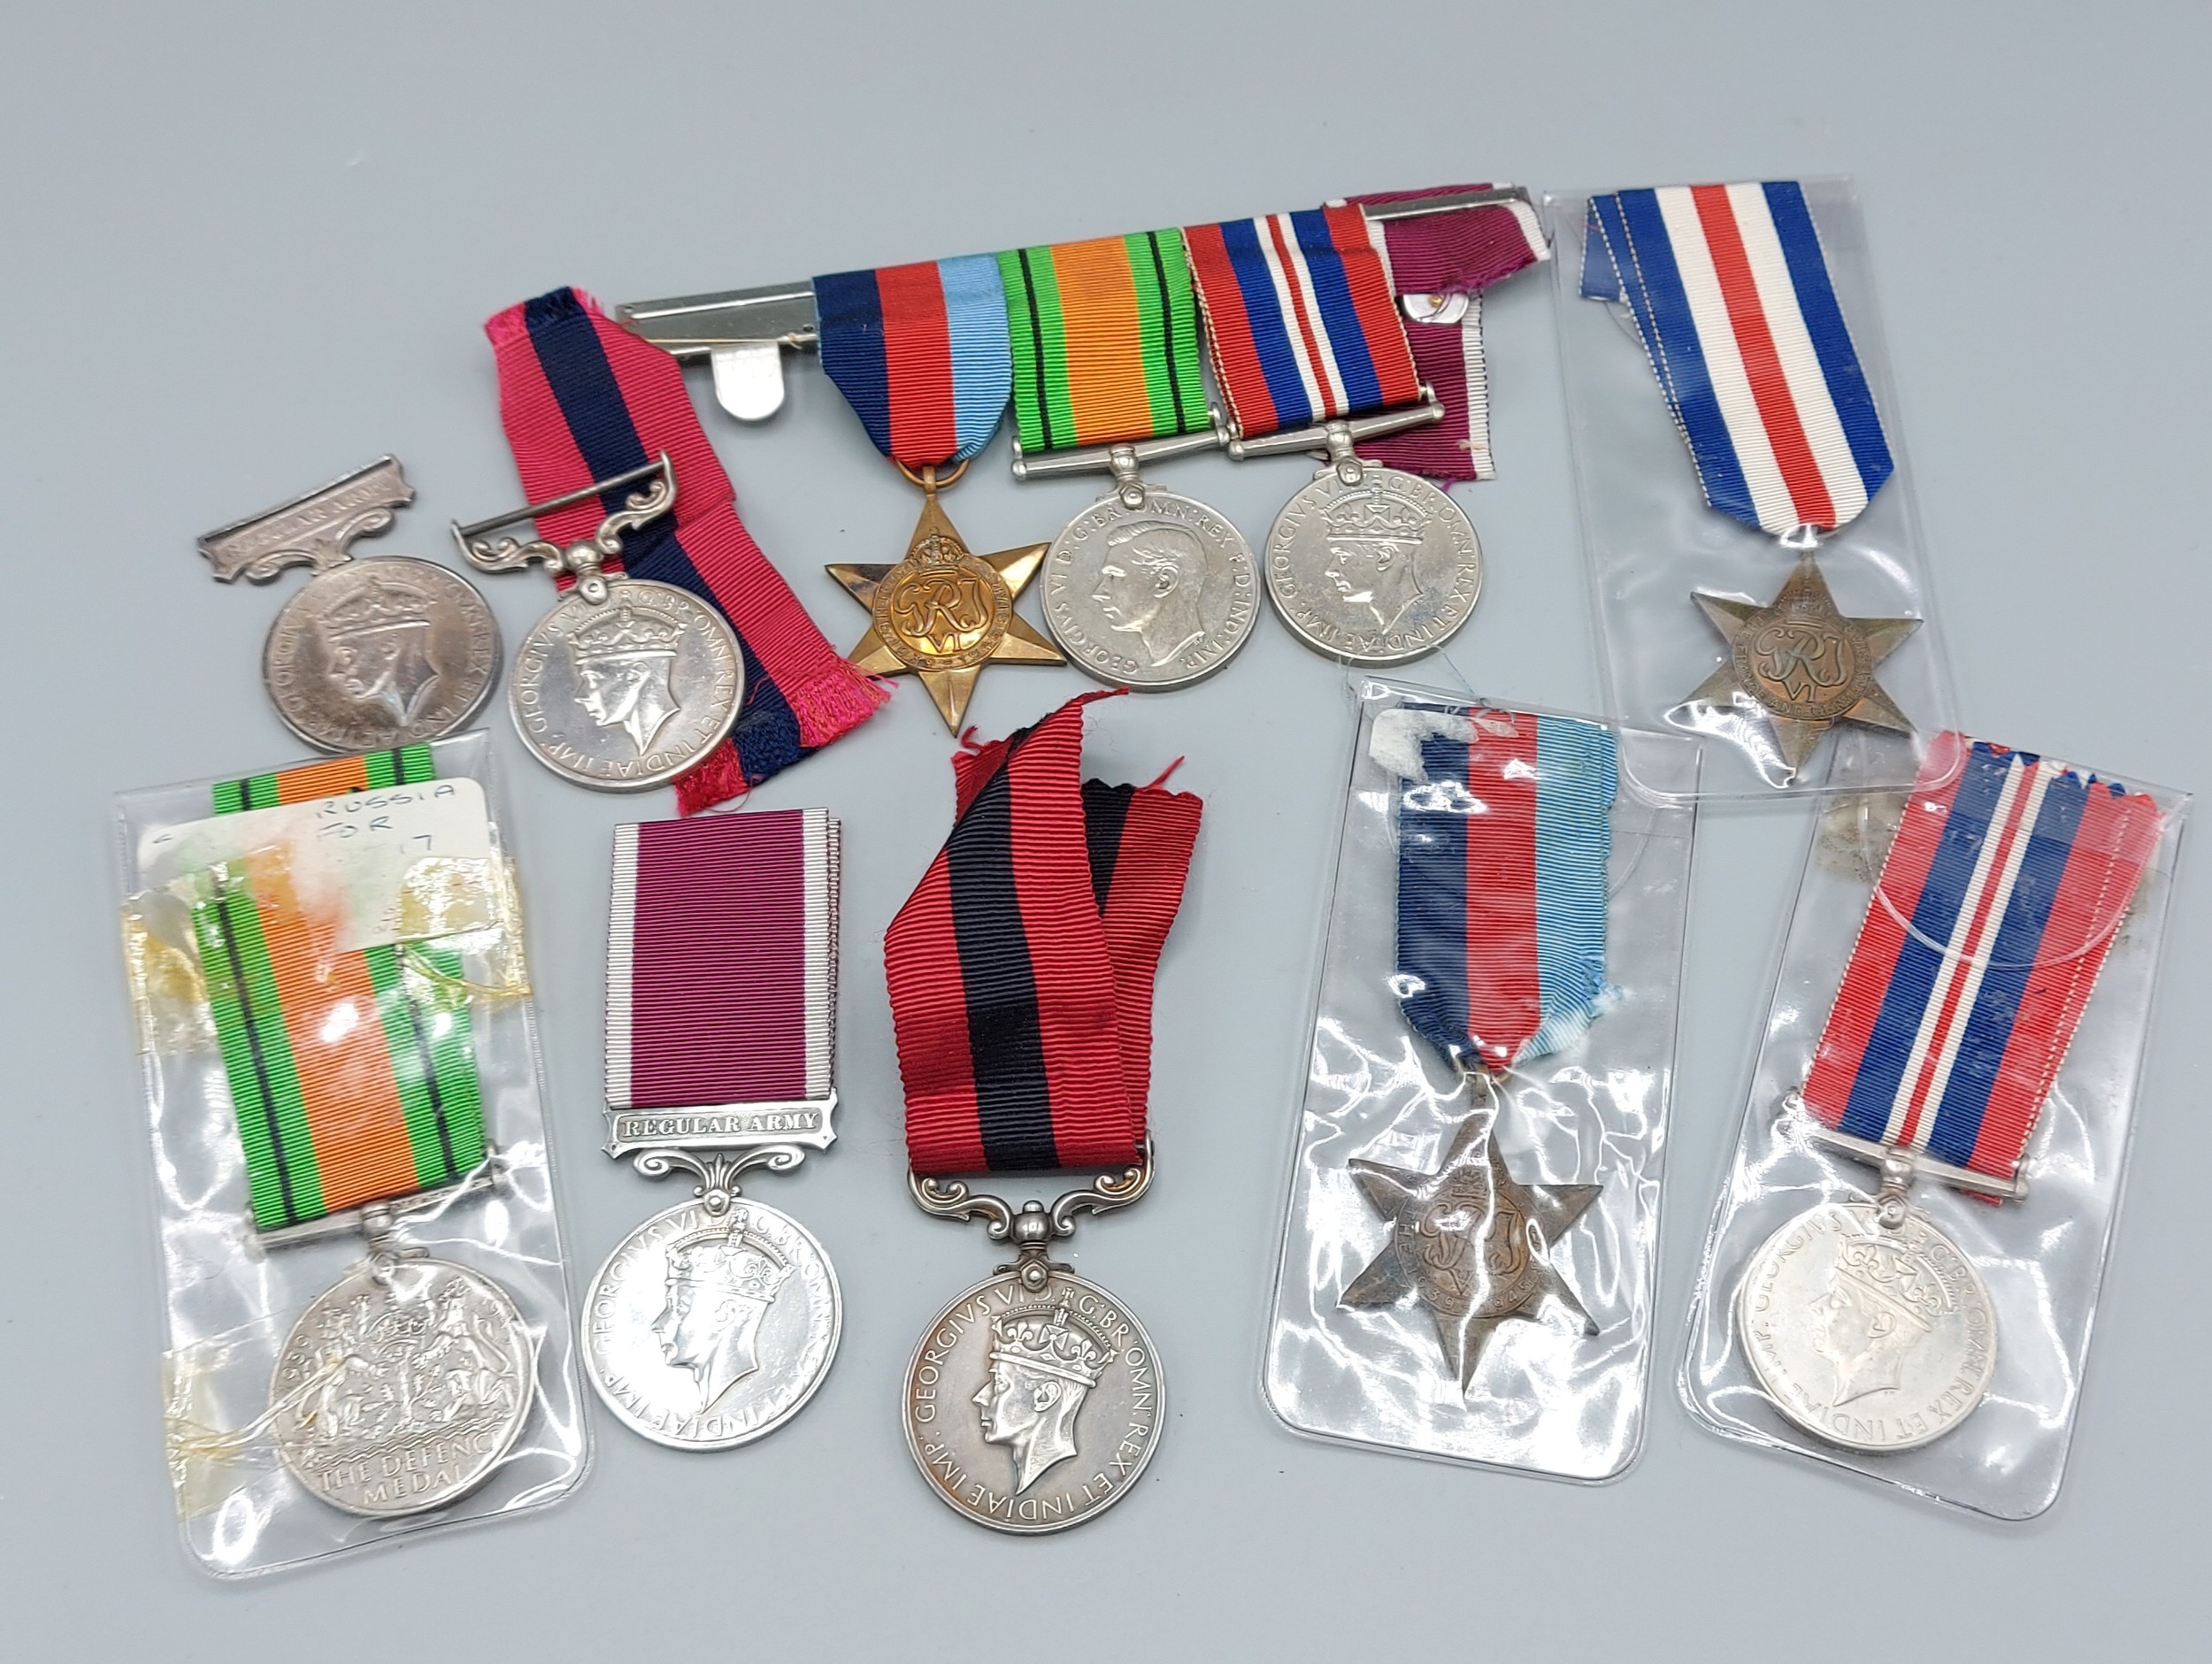 A collection of WWII medals to include Defence Medals, Stars, War Medals and others